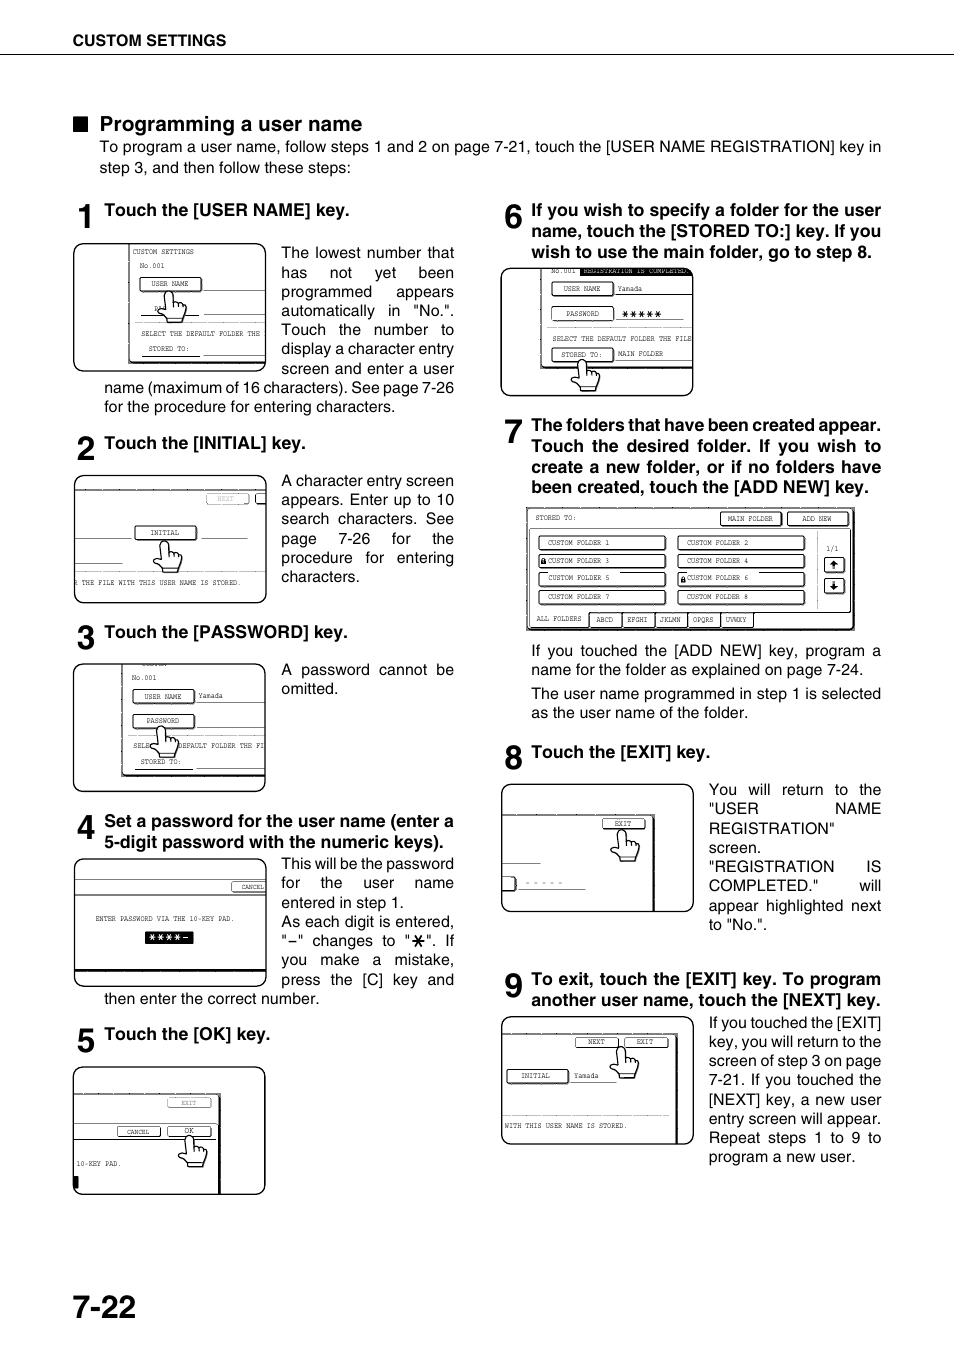 Programming a user name, Programming a user name" on, Ge 7-22) | Touch the [user name] key, Touch the [initial] key, Touch the [password] key, Touch the [ok] key, Touch the [exit] key | Sharp AR-M700N User Manual | Page 156 / 172